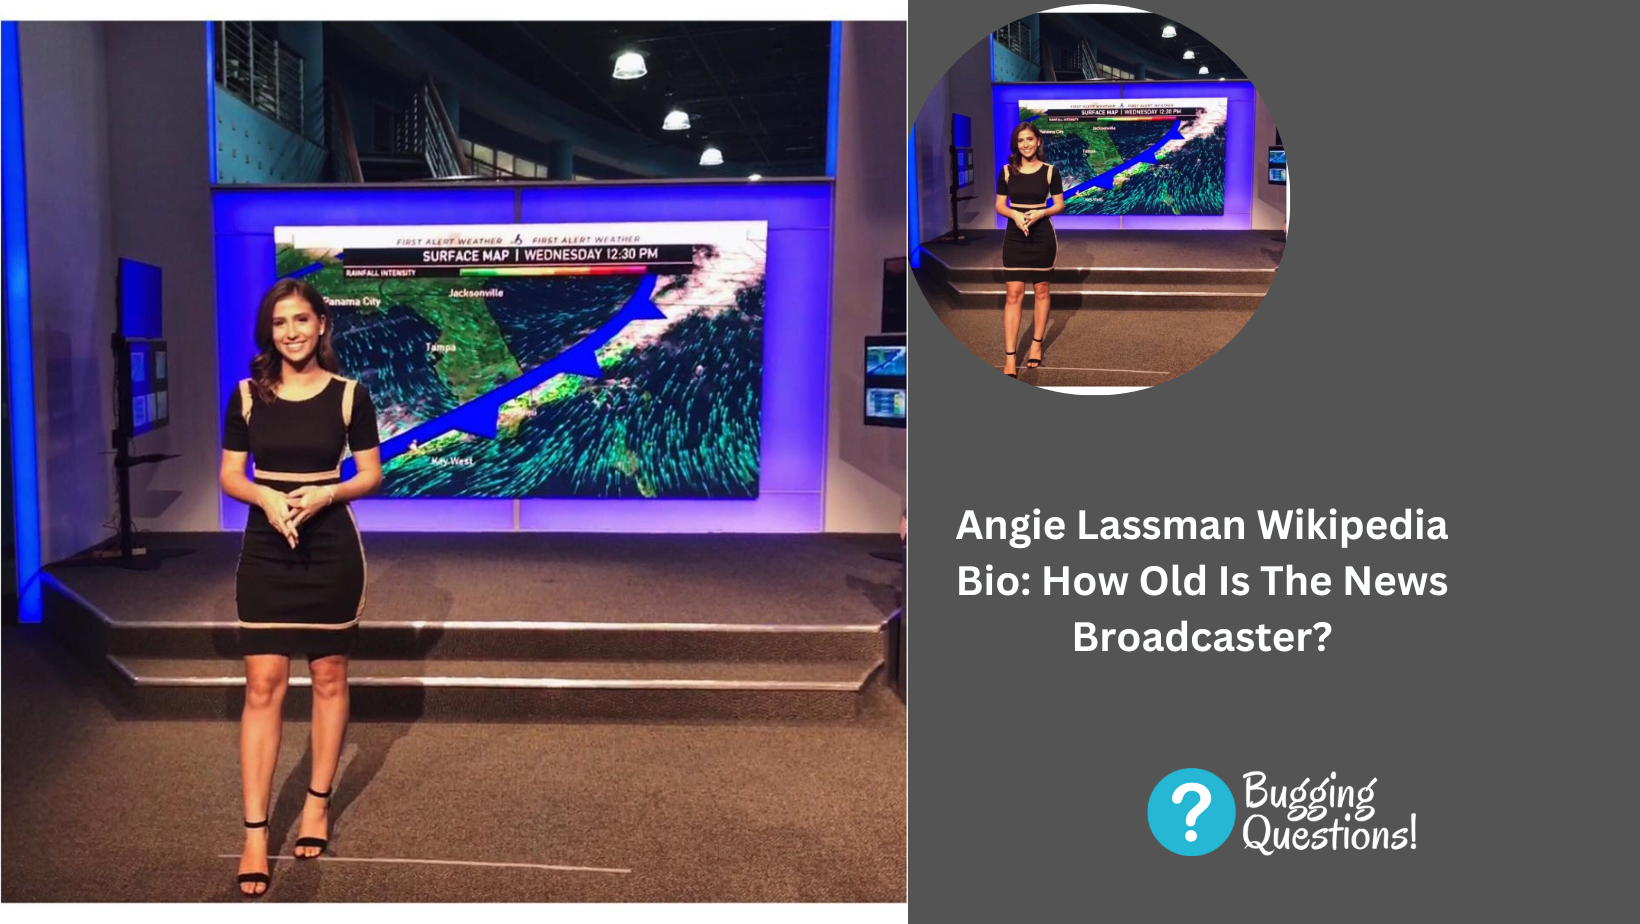 Angie Lassman Wikipedia Bio: How Old Is The News Broadcaster? Instagram Photos Explored